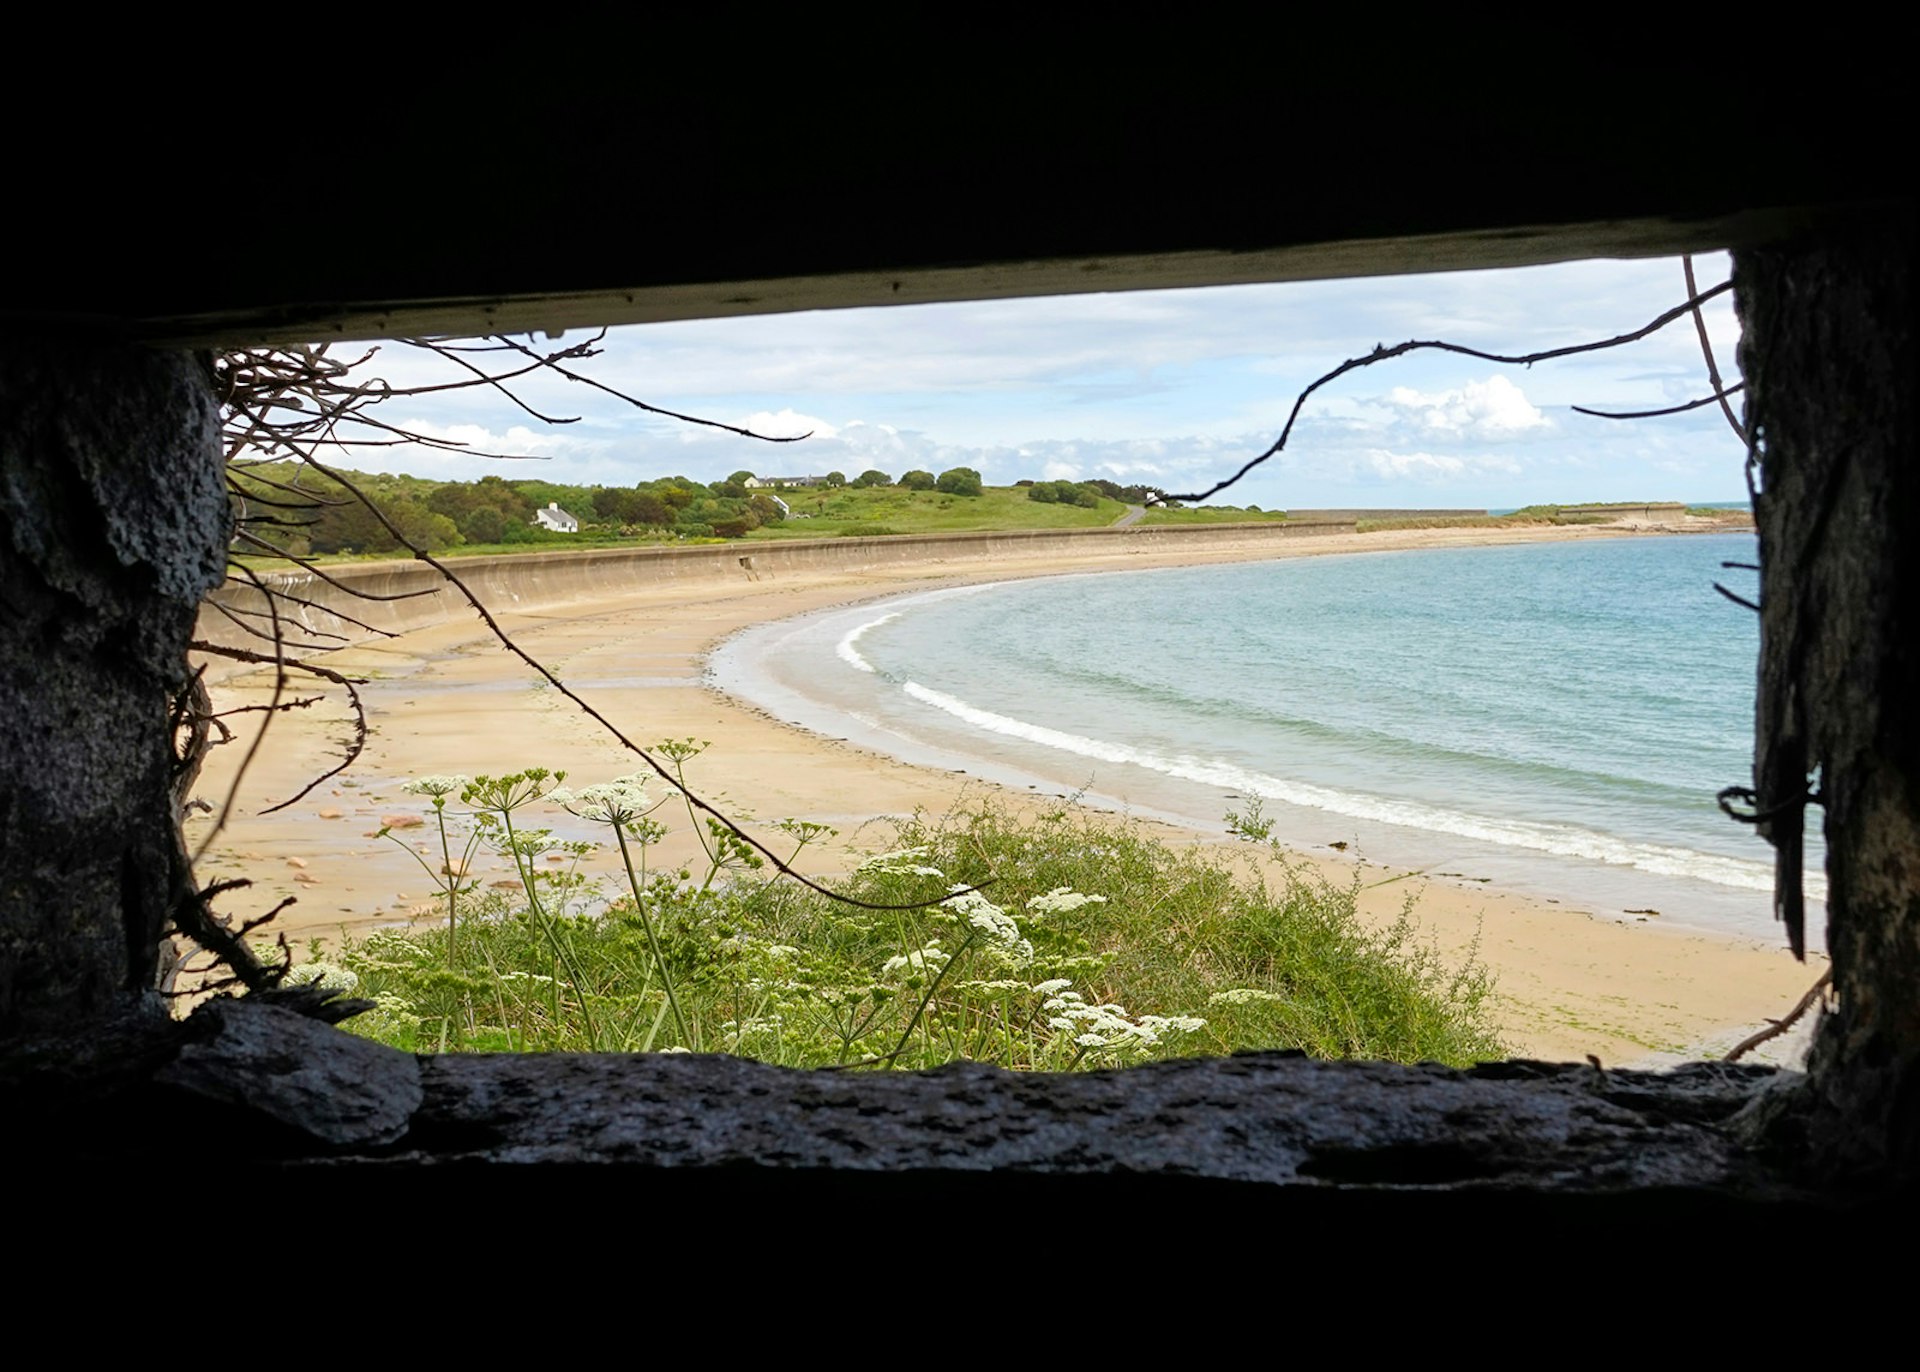 View from a WWII bunker, Alderney © James Kay / Lonely Planet